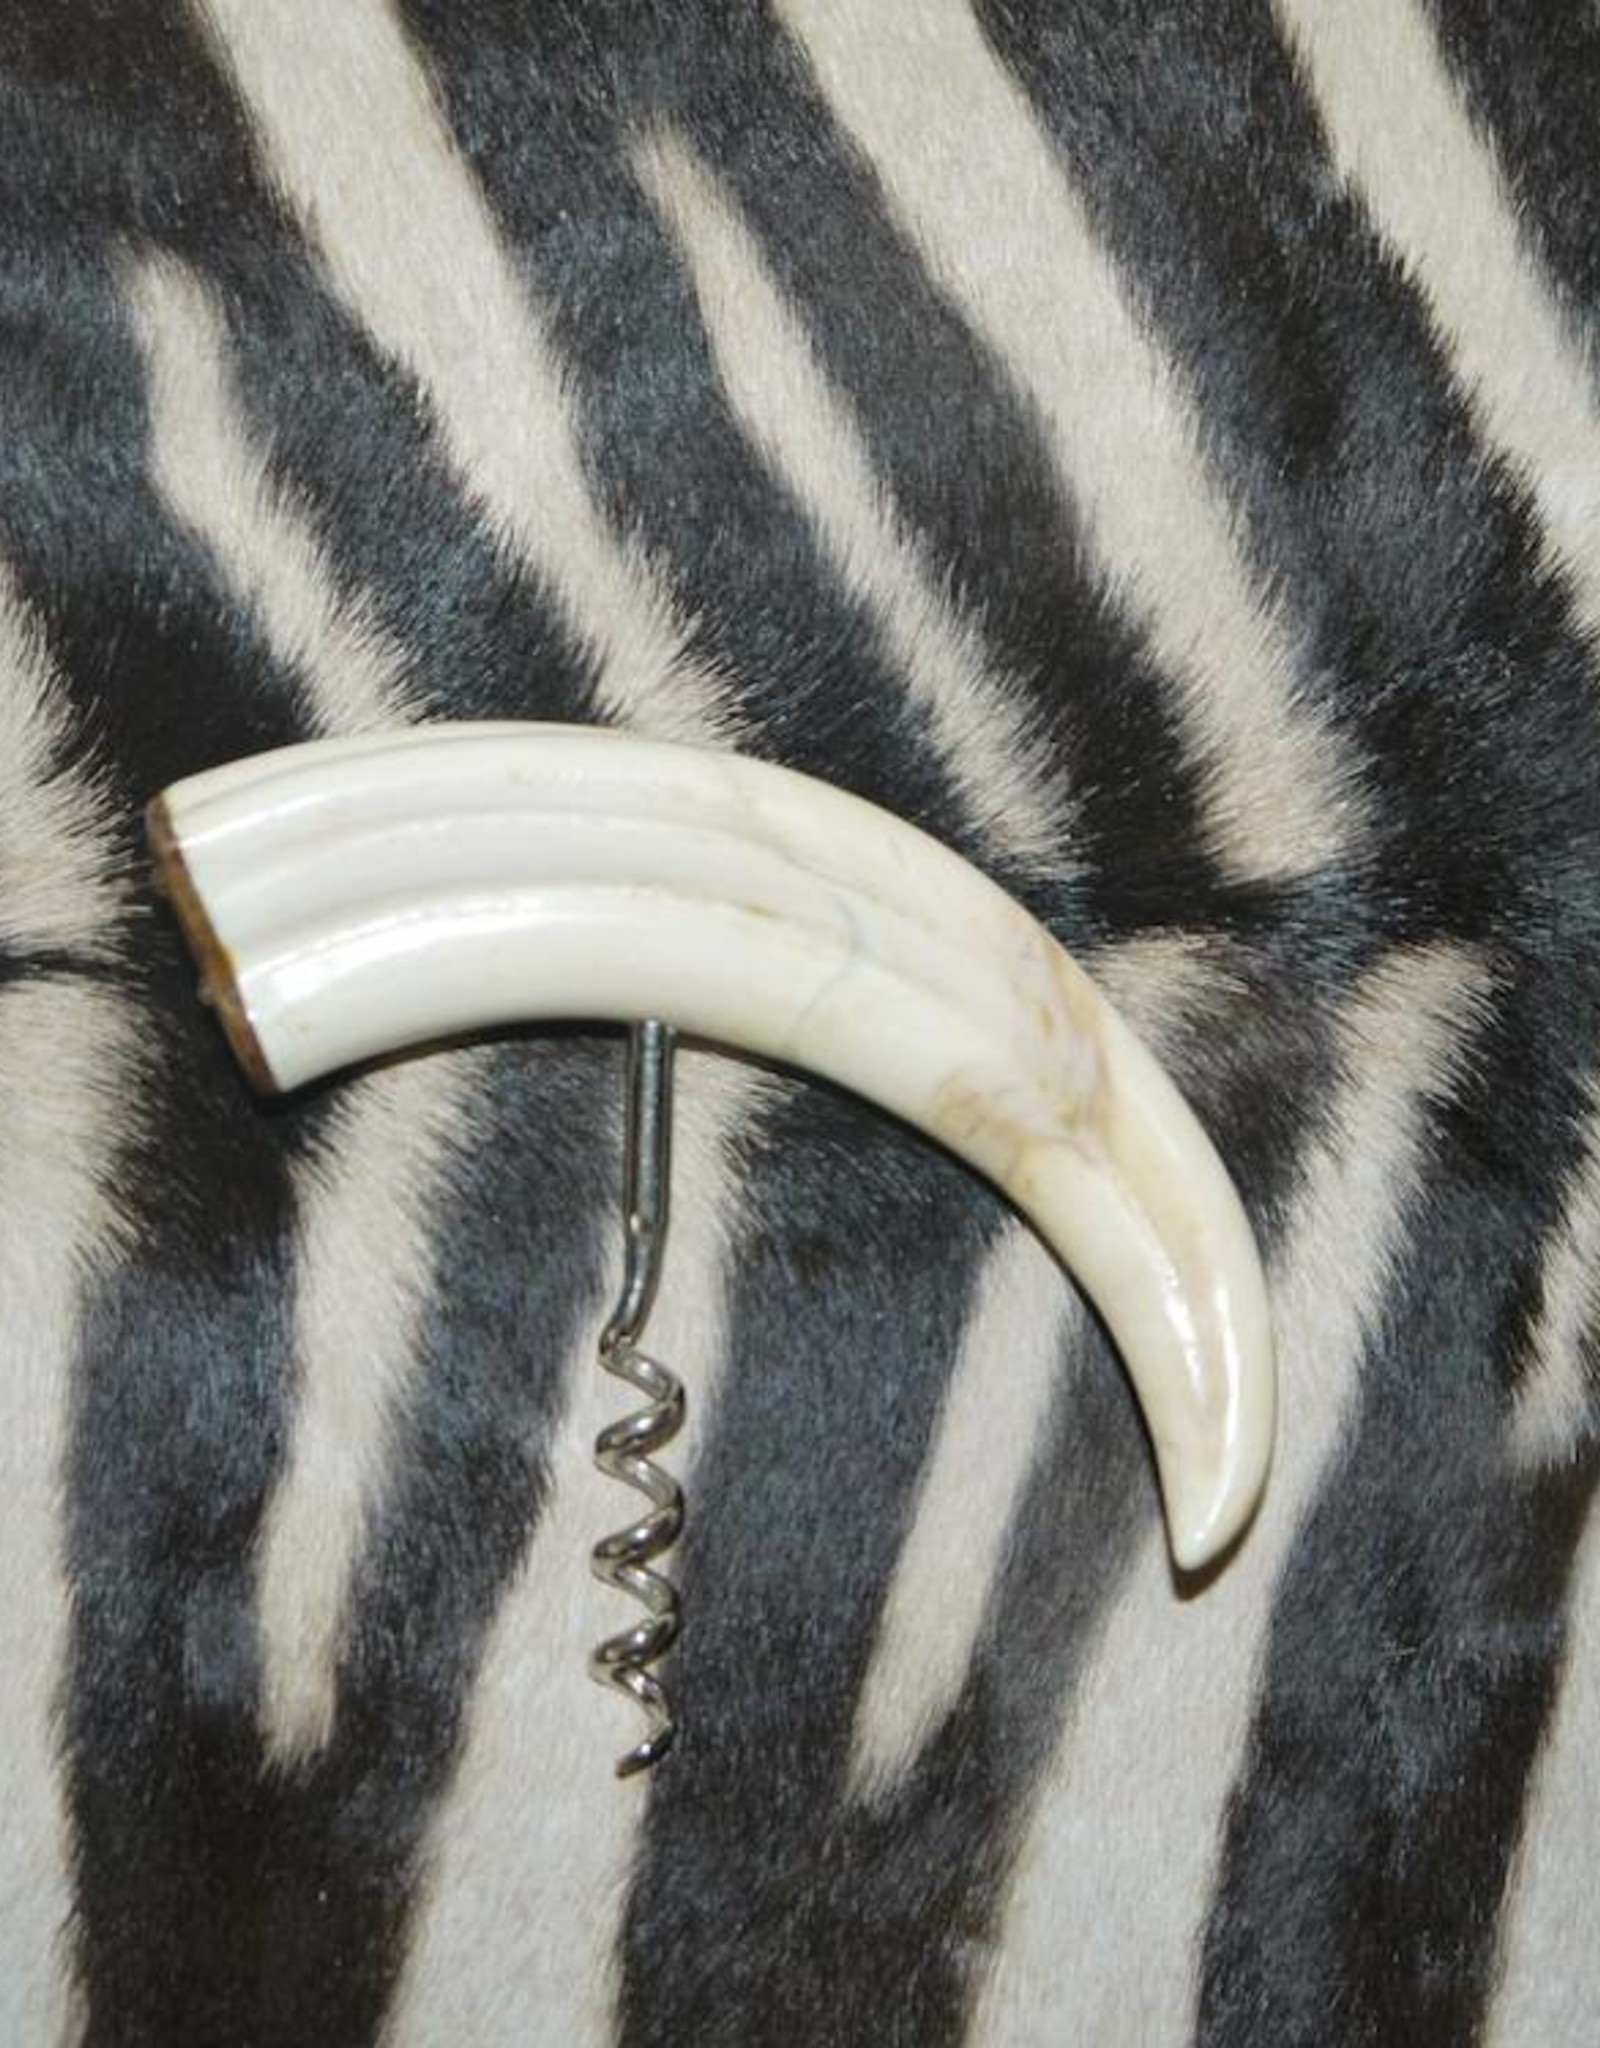 Corkscrew made from real warthog tusks